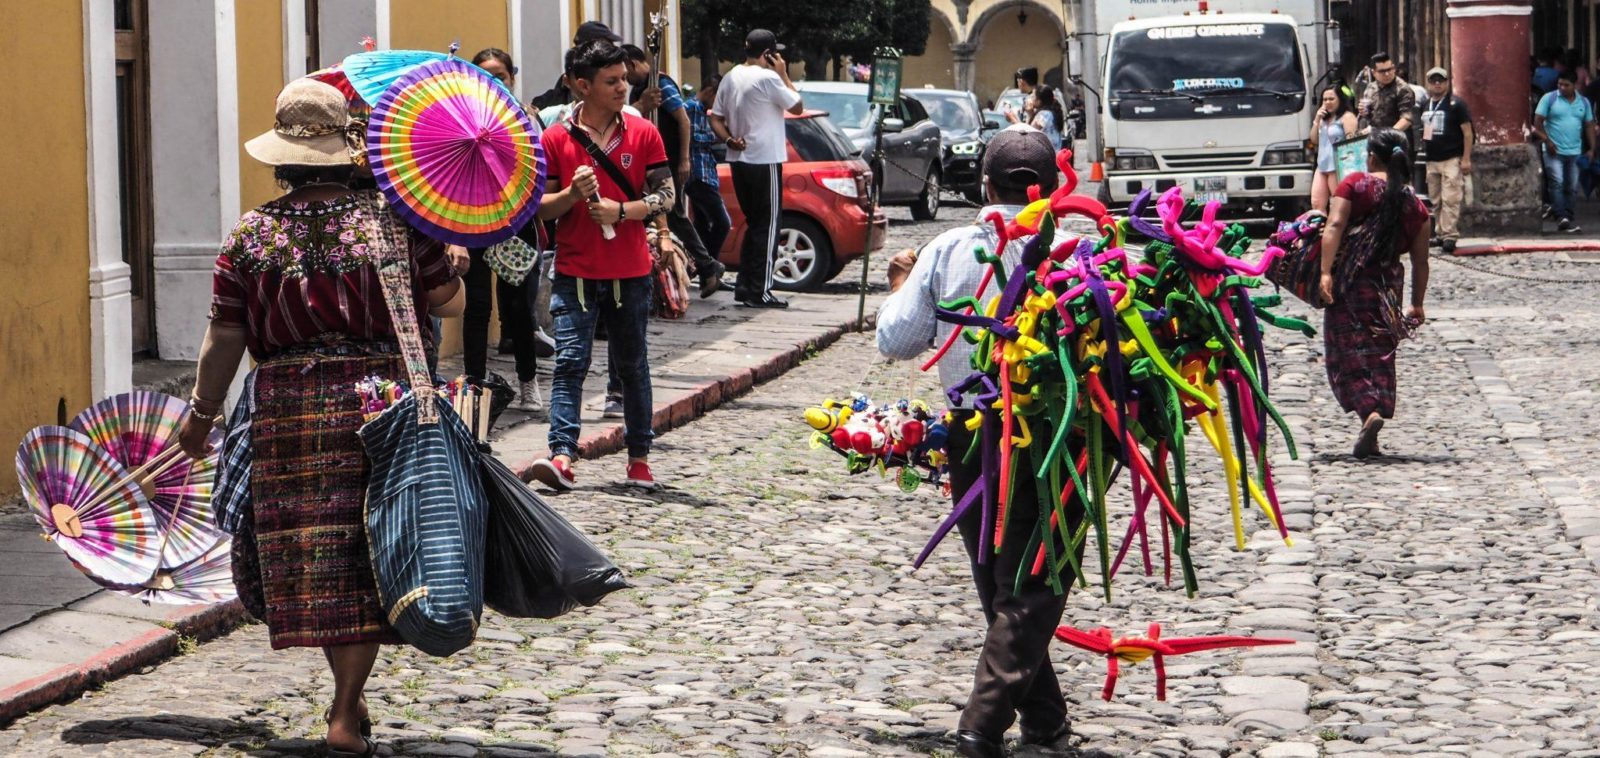 4 days in Antigua: A group of people walking down a cobblestone street with colorful umbrellas.